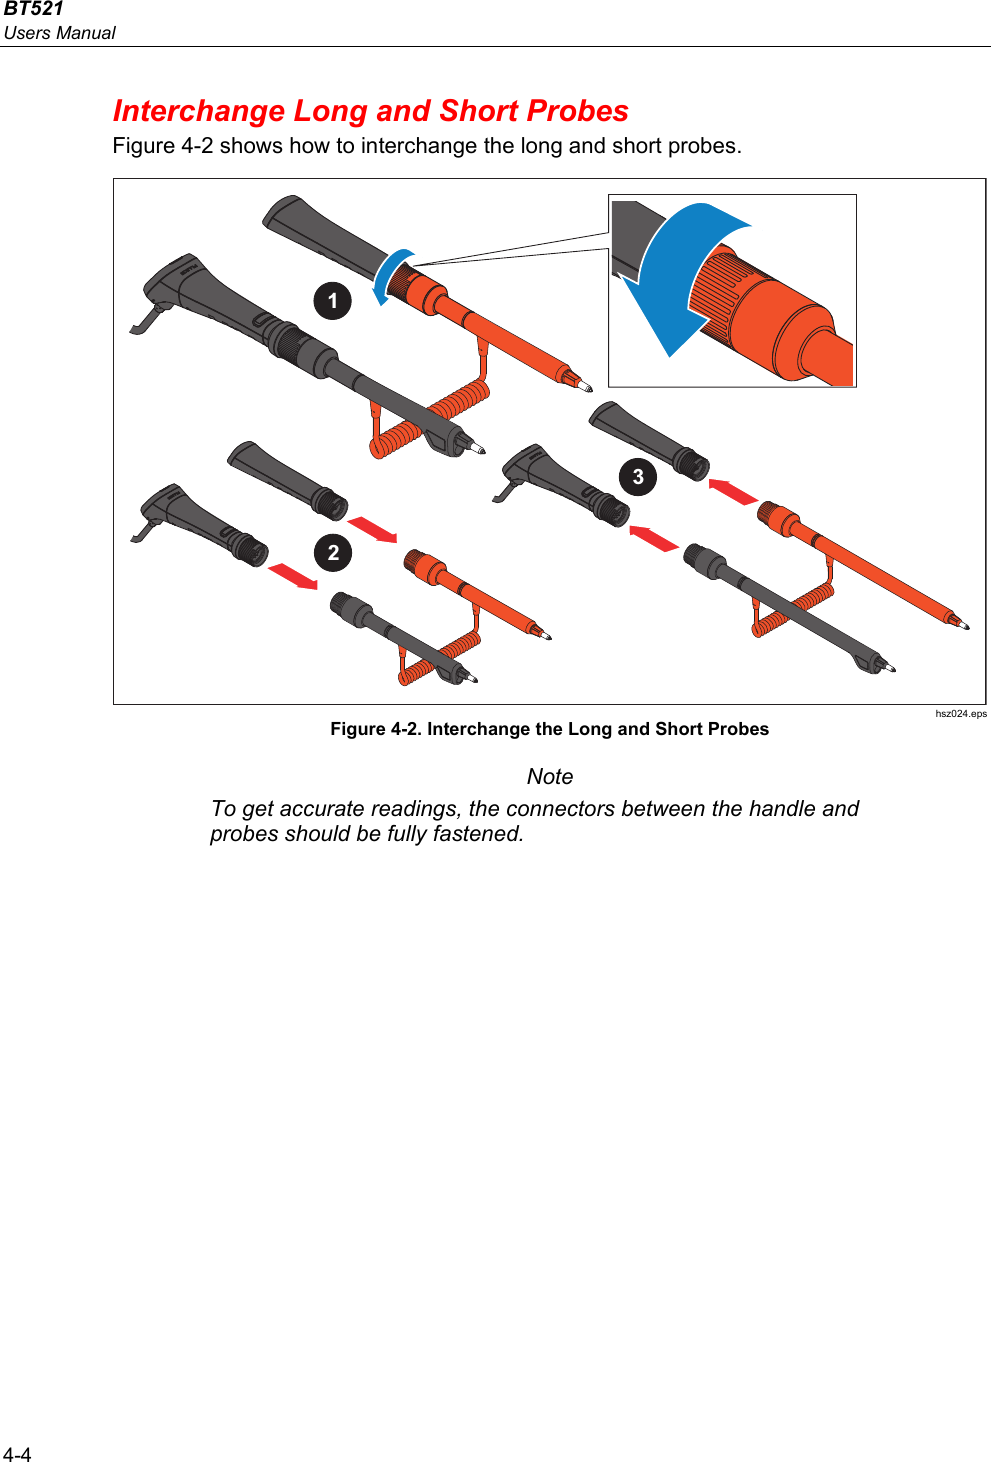 BT521 Users Manual 4-4 Interchange Long and Short Probes Figure 4-2 shows how to interchange the long and short probes. 123 hsz024.eps Figure 4-2. Interchange the Long and Short Probes Note To get accurate readings, the connectors between the handle and probes should be fully fastened.   